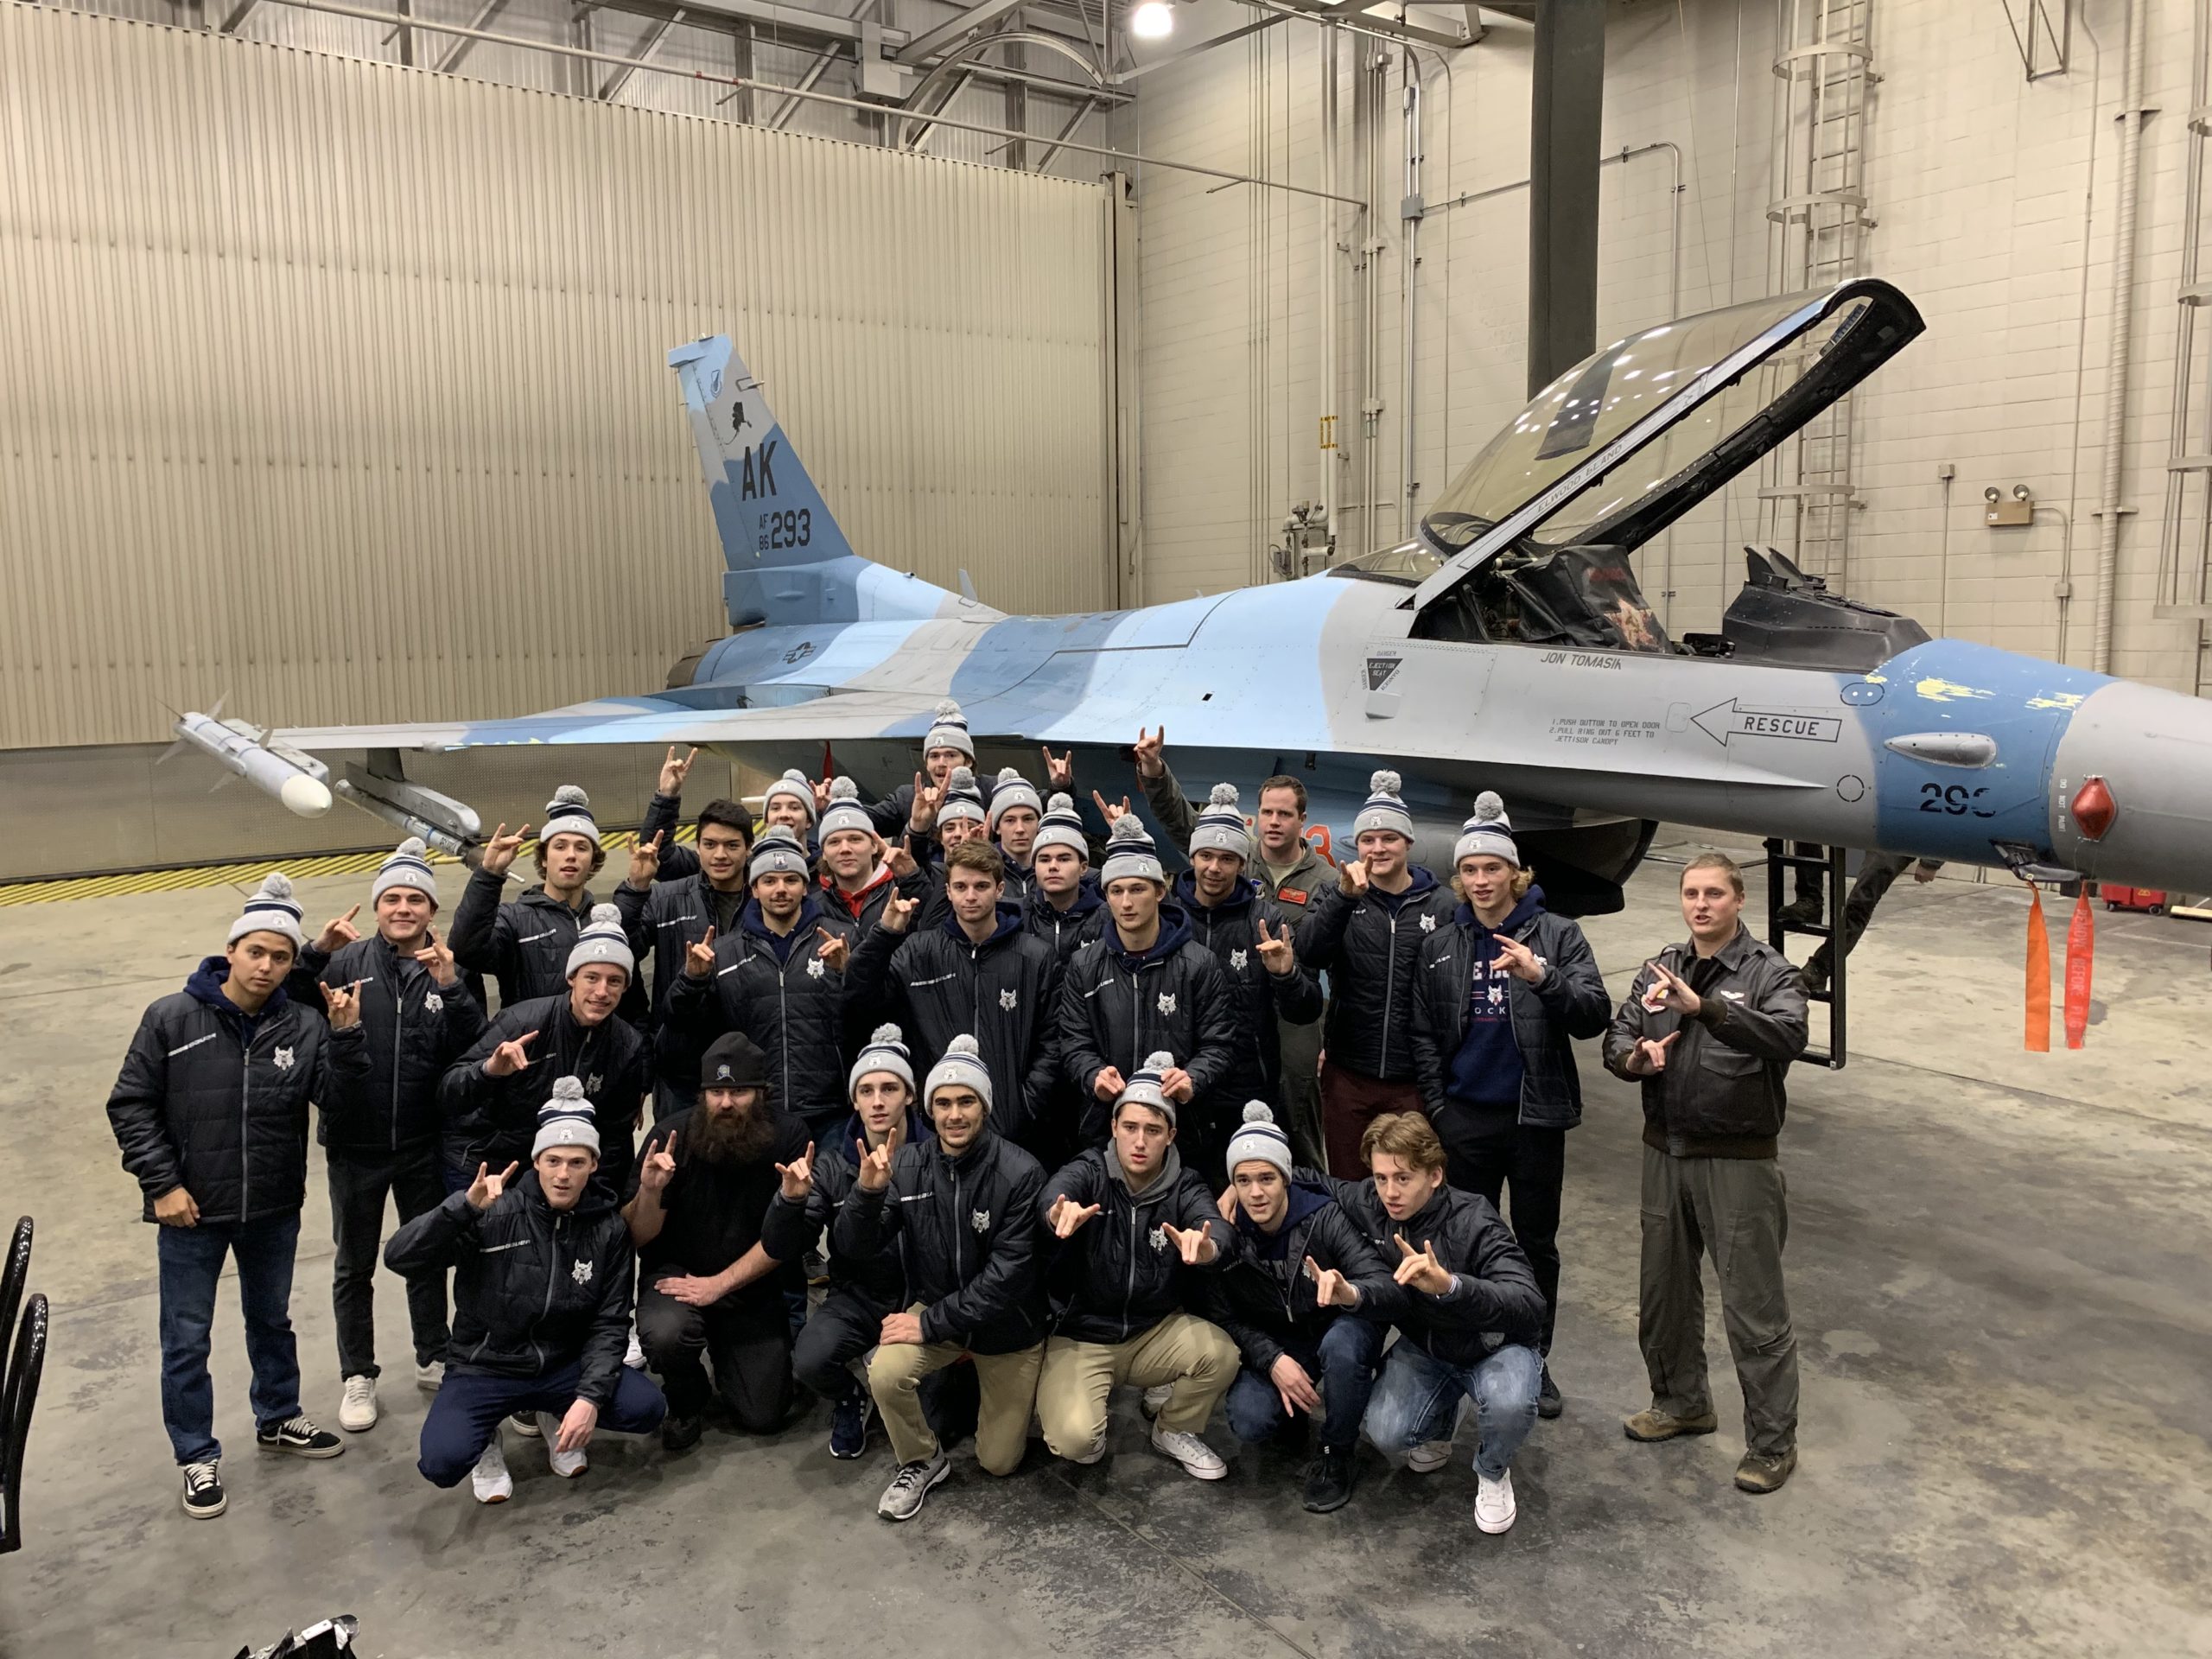 Ice Dogs pose in front of F-16 fighter jet.